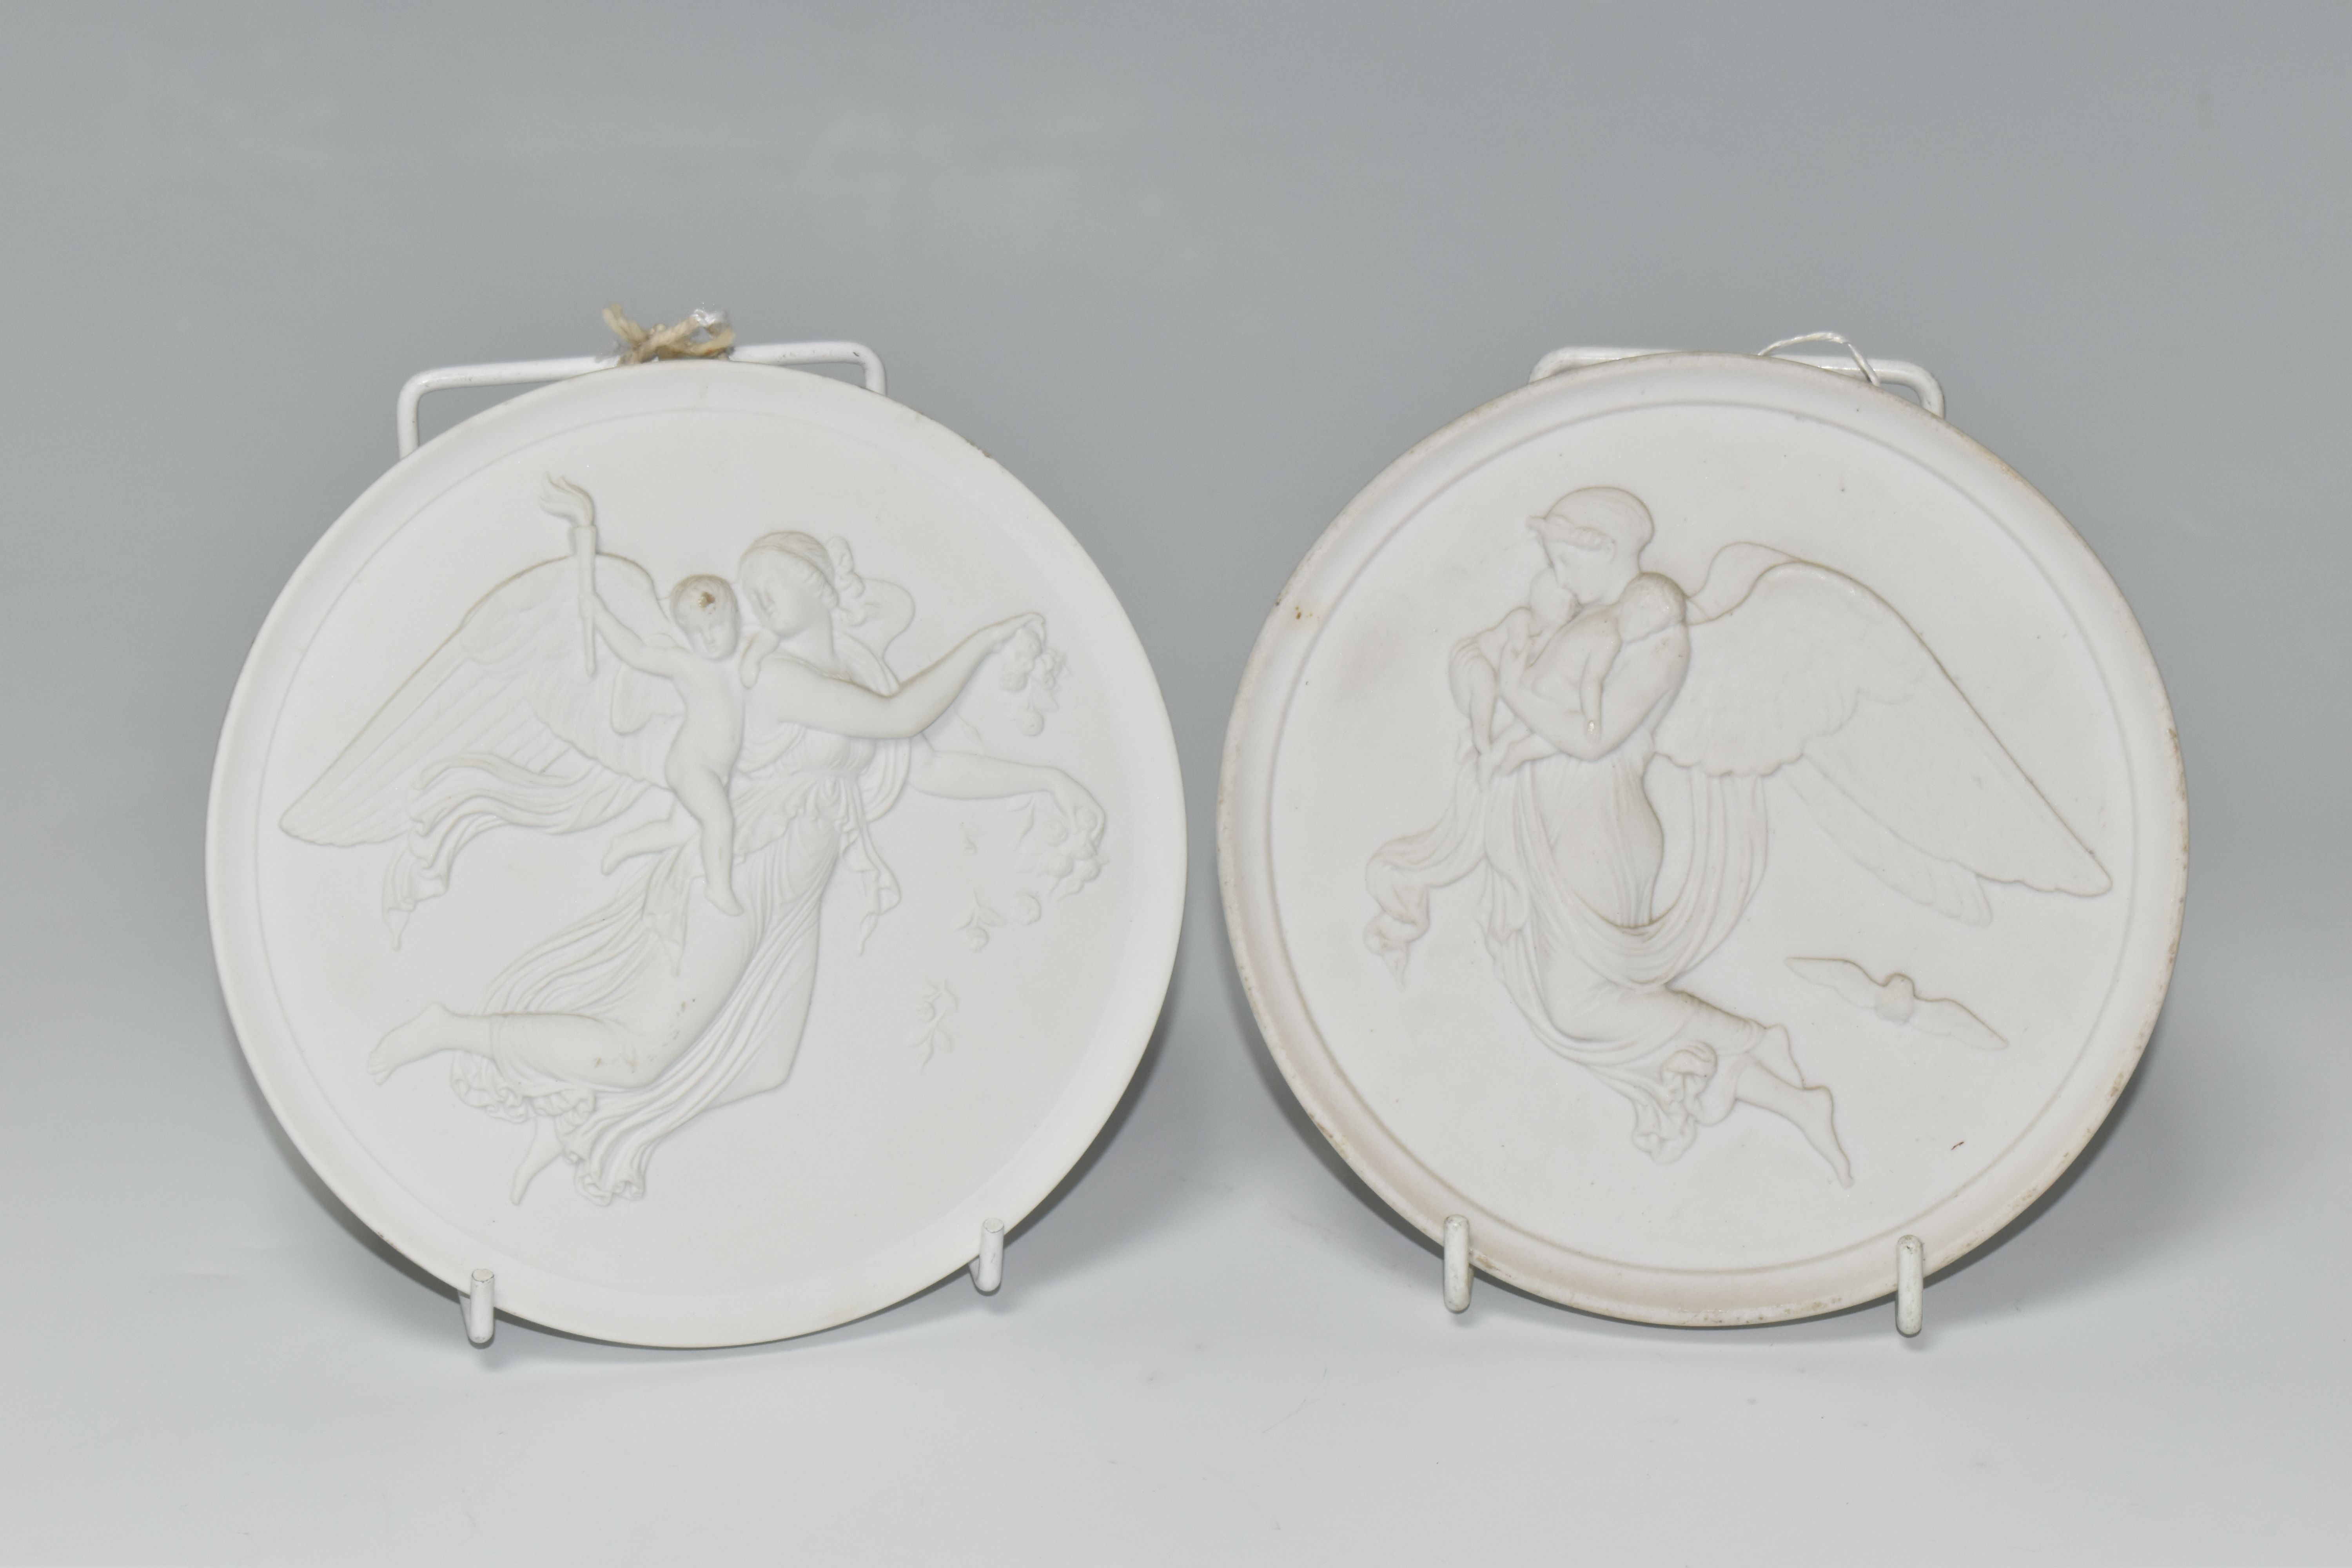 TWO ROYAL COPENHAGEN CIRCULAR BISQUE PLAQUES, depicting angels and cherubs, one bearing painted